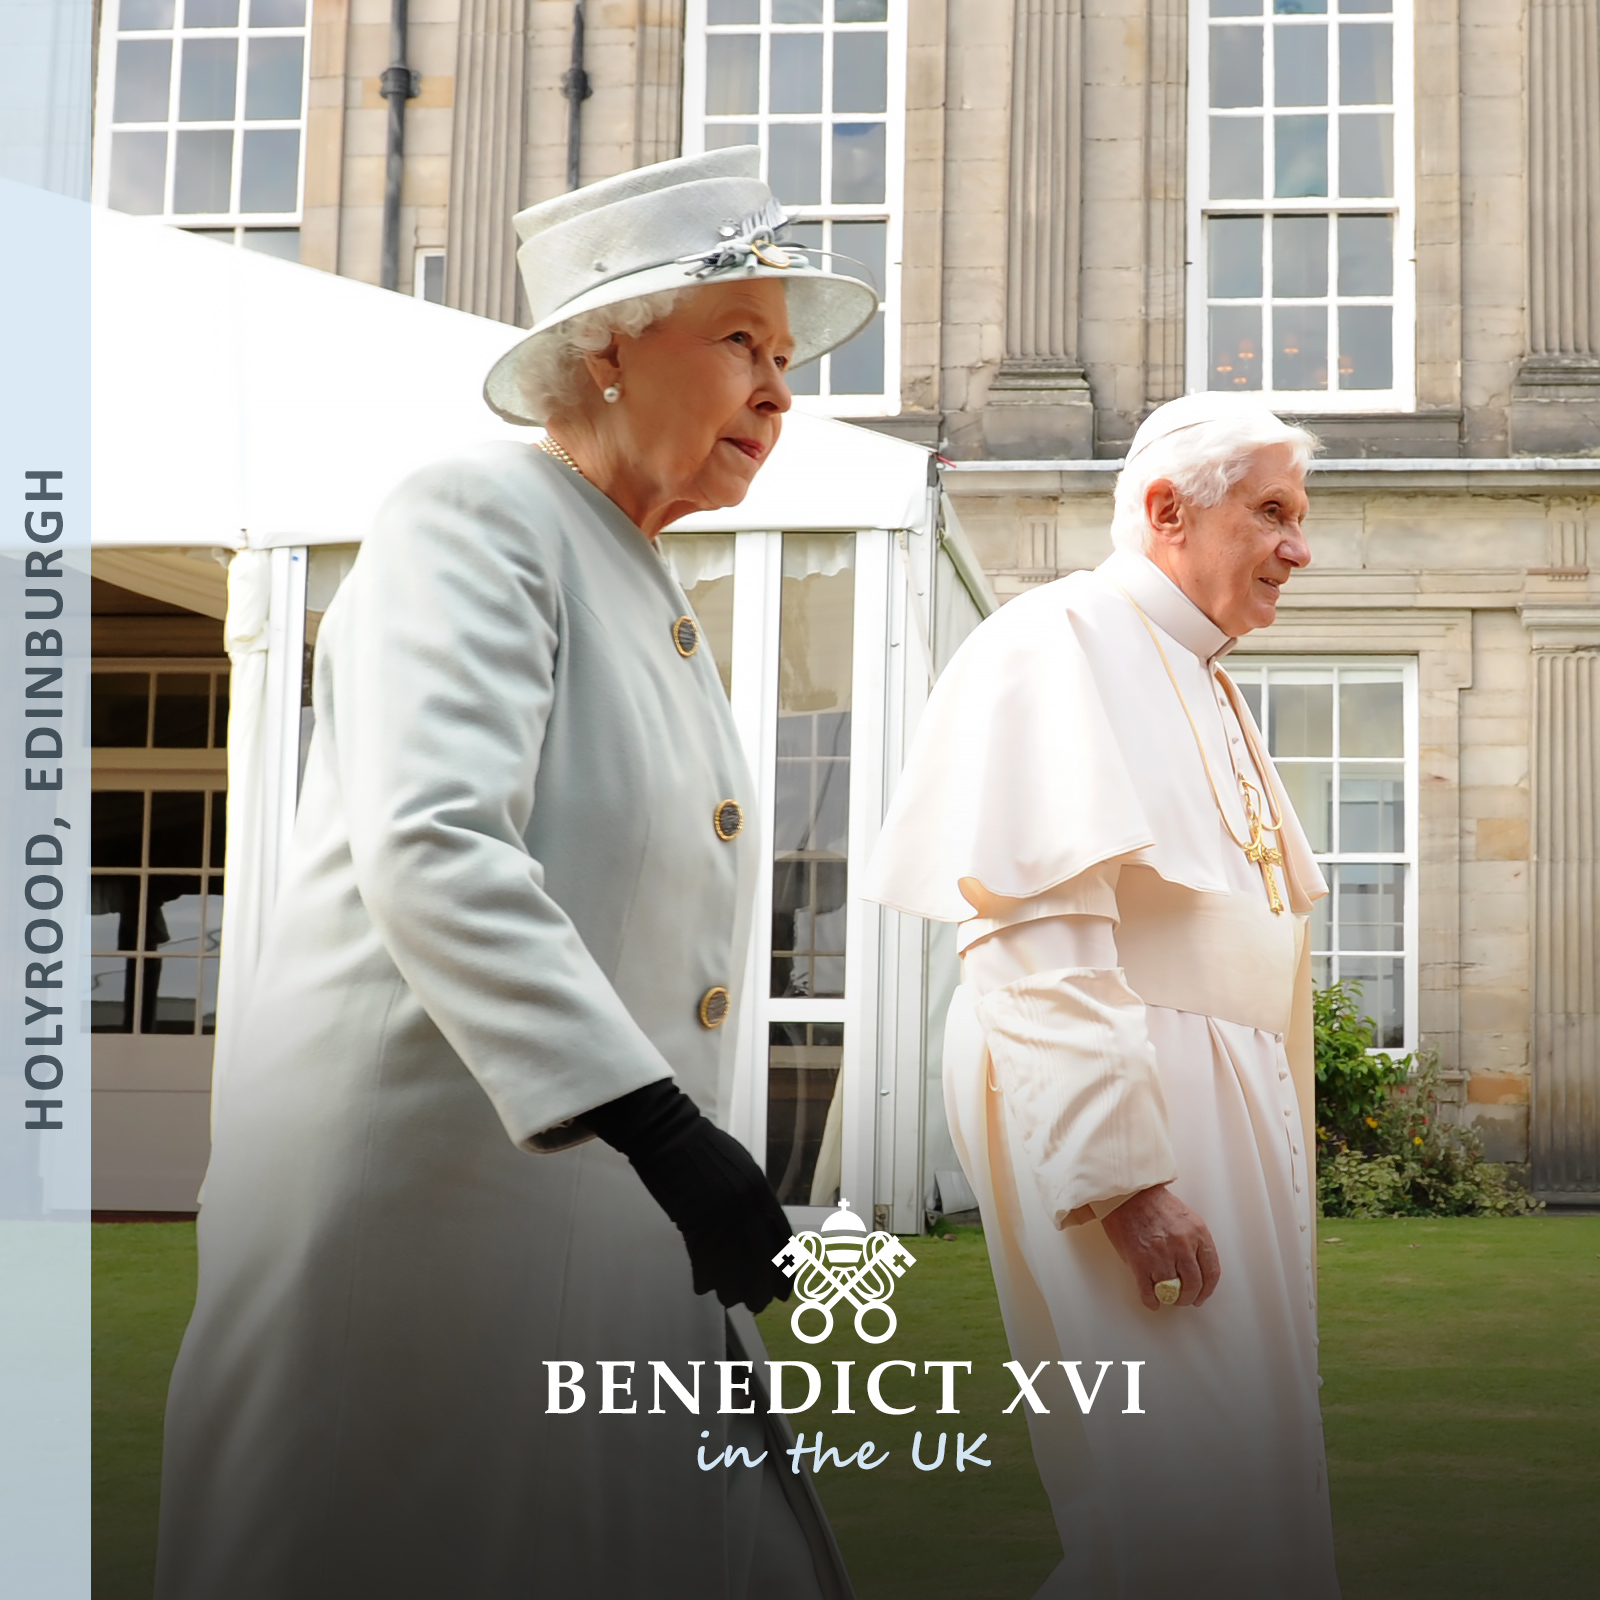  The Queen welcomes Pope Benedict to the UK 